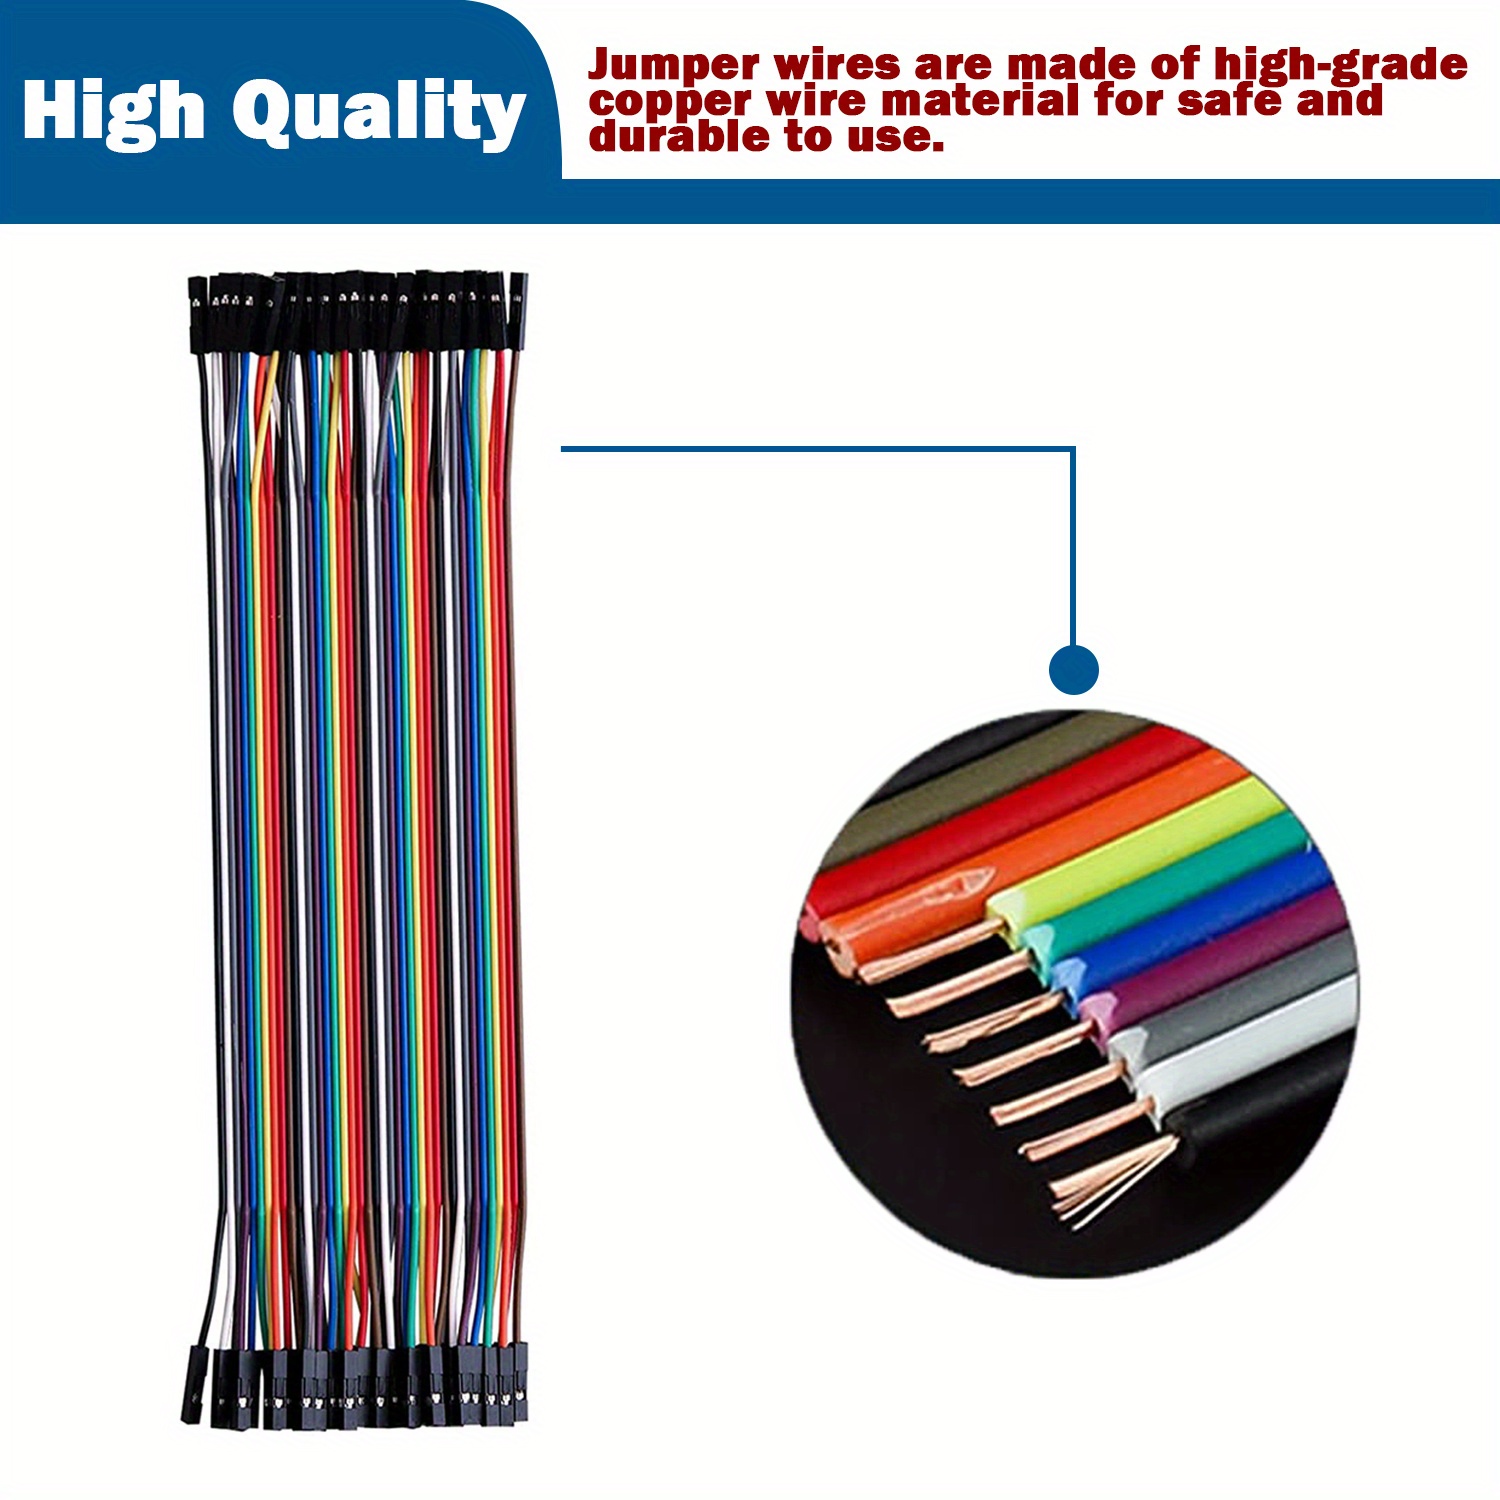 Z&T 100pcs Solderless Flexible Breadboard Jumper Wires Kit Male to Male 12  16 20 25cm Optional, 1A Multicolored Arduino Wires Dupont Ribbon Cables for